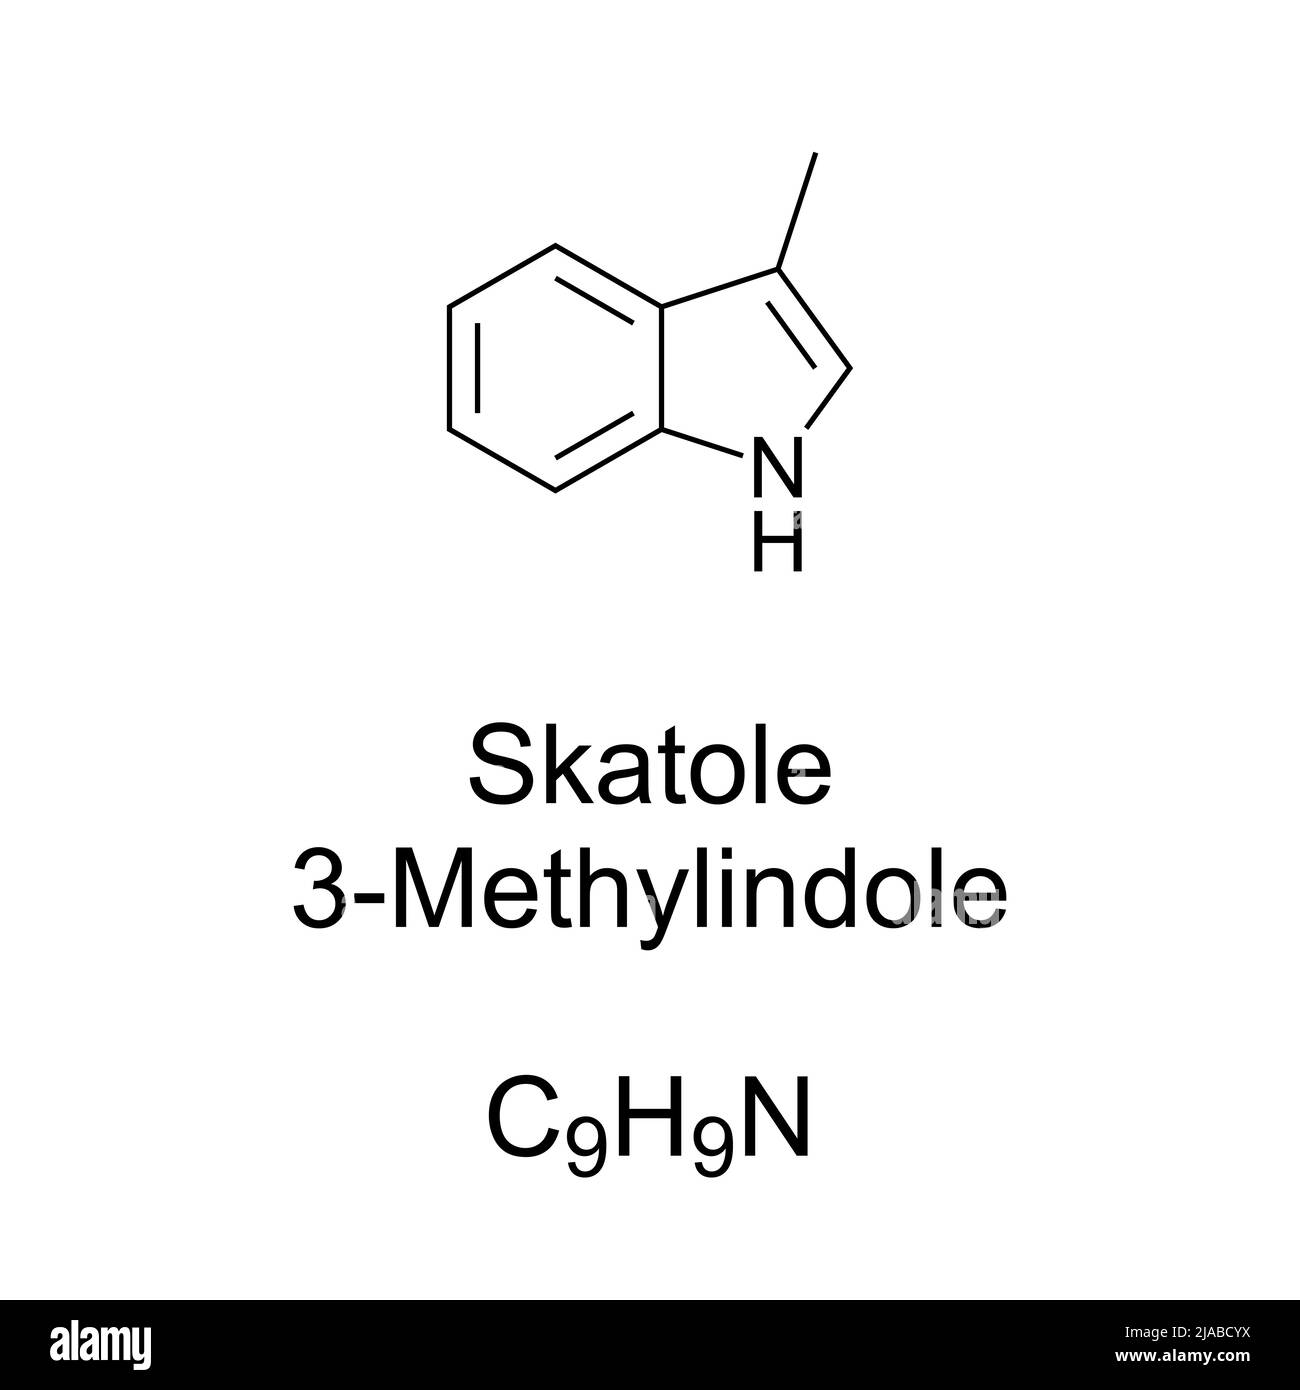 Skatole, 3-methylindole, chemical formula and structure. Organic compound, occurs naturally in feces of mammals and birds. Contributor to fecal odor. Stock Photo